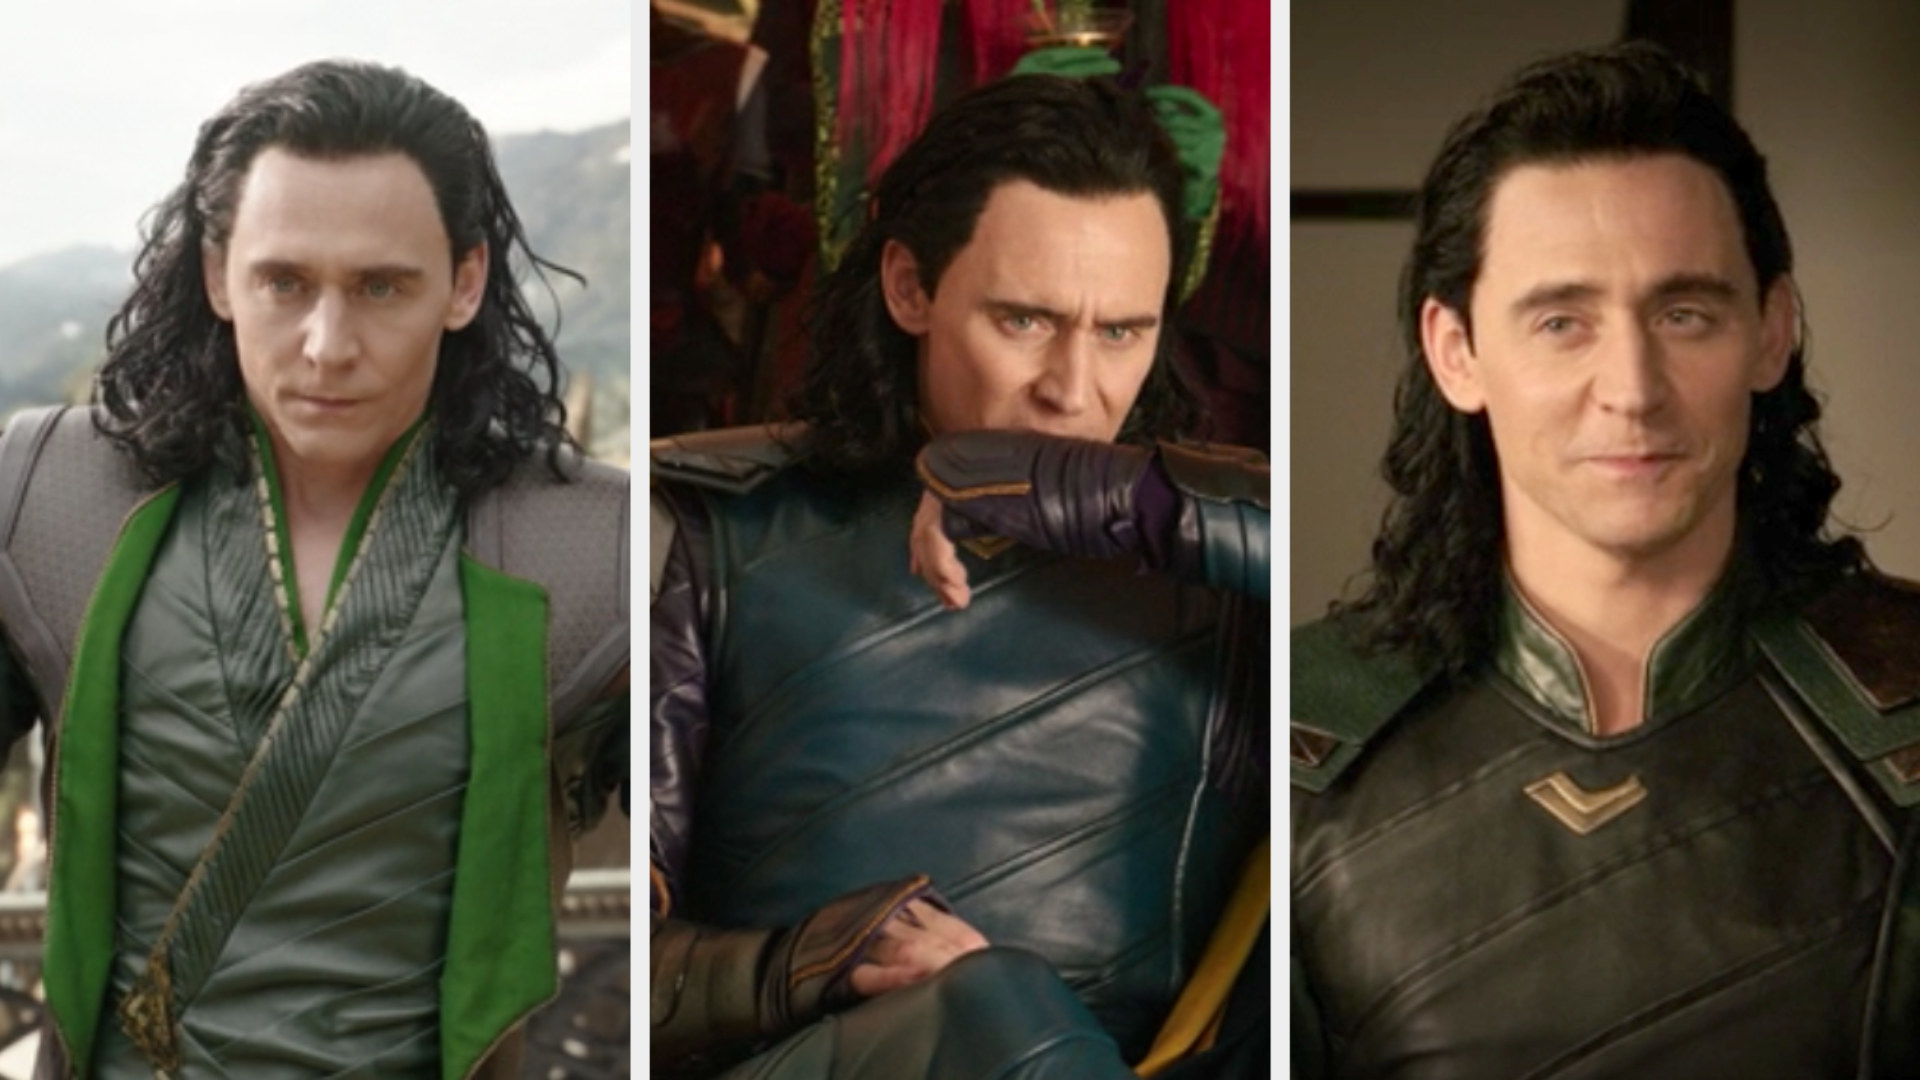 Loki in a green outfit in the beginning of the movie, blue in the middle, and back to green in the end of Ragnarok